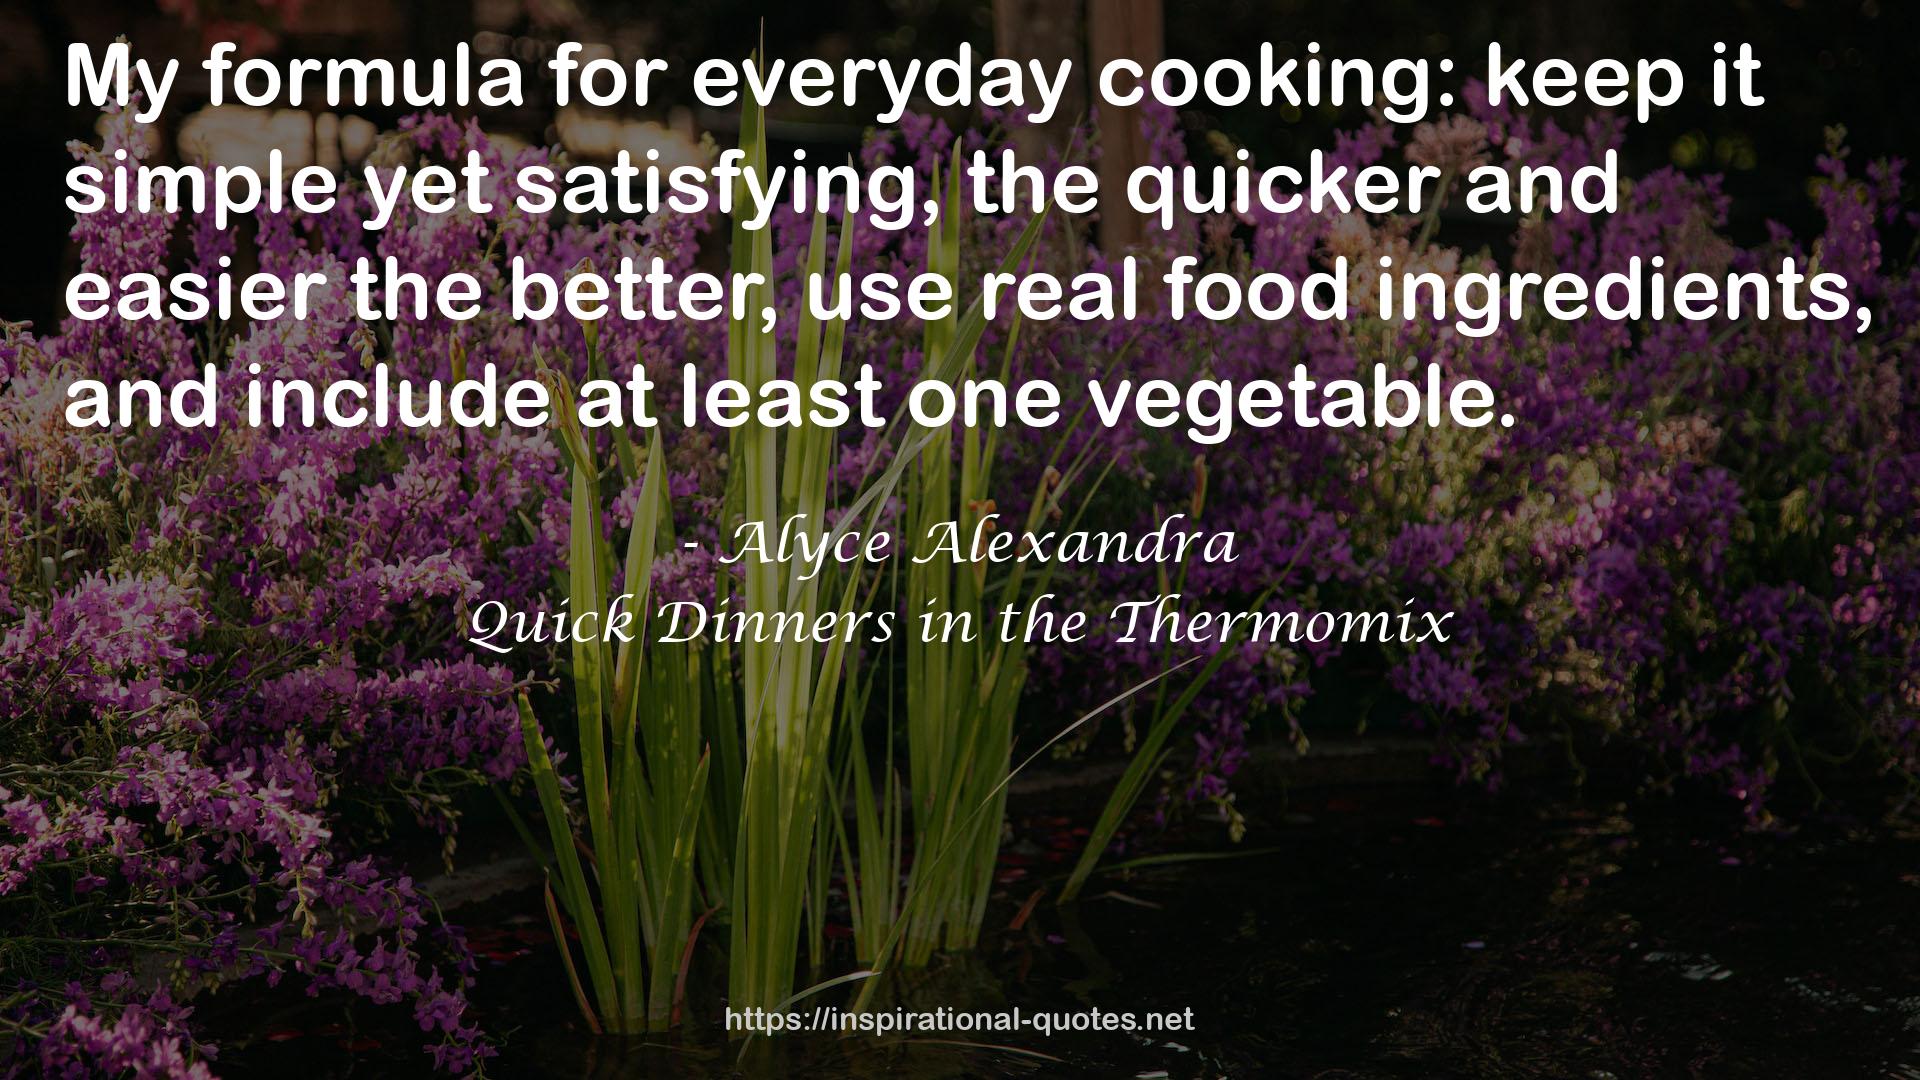 Quick Dinners in the Thermomix QUOTES